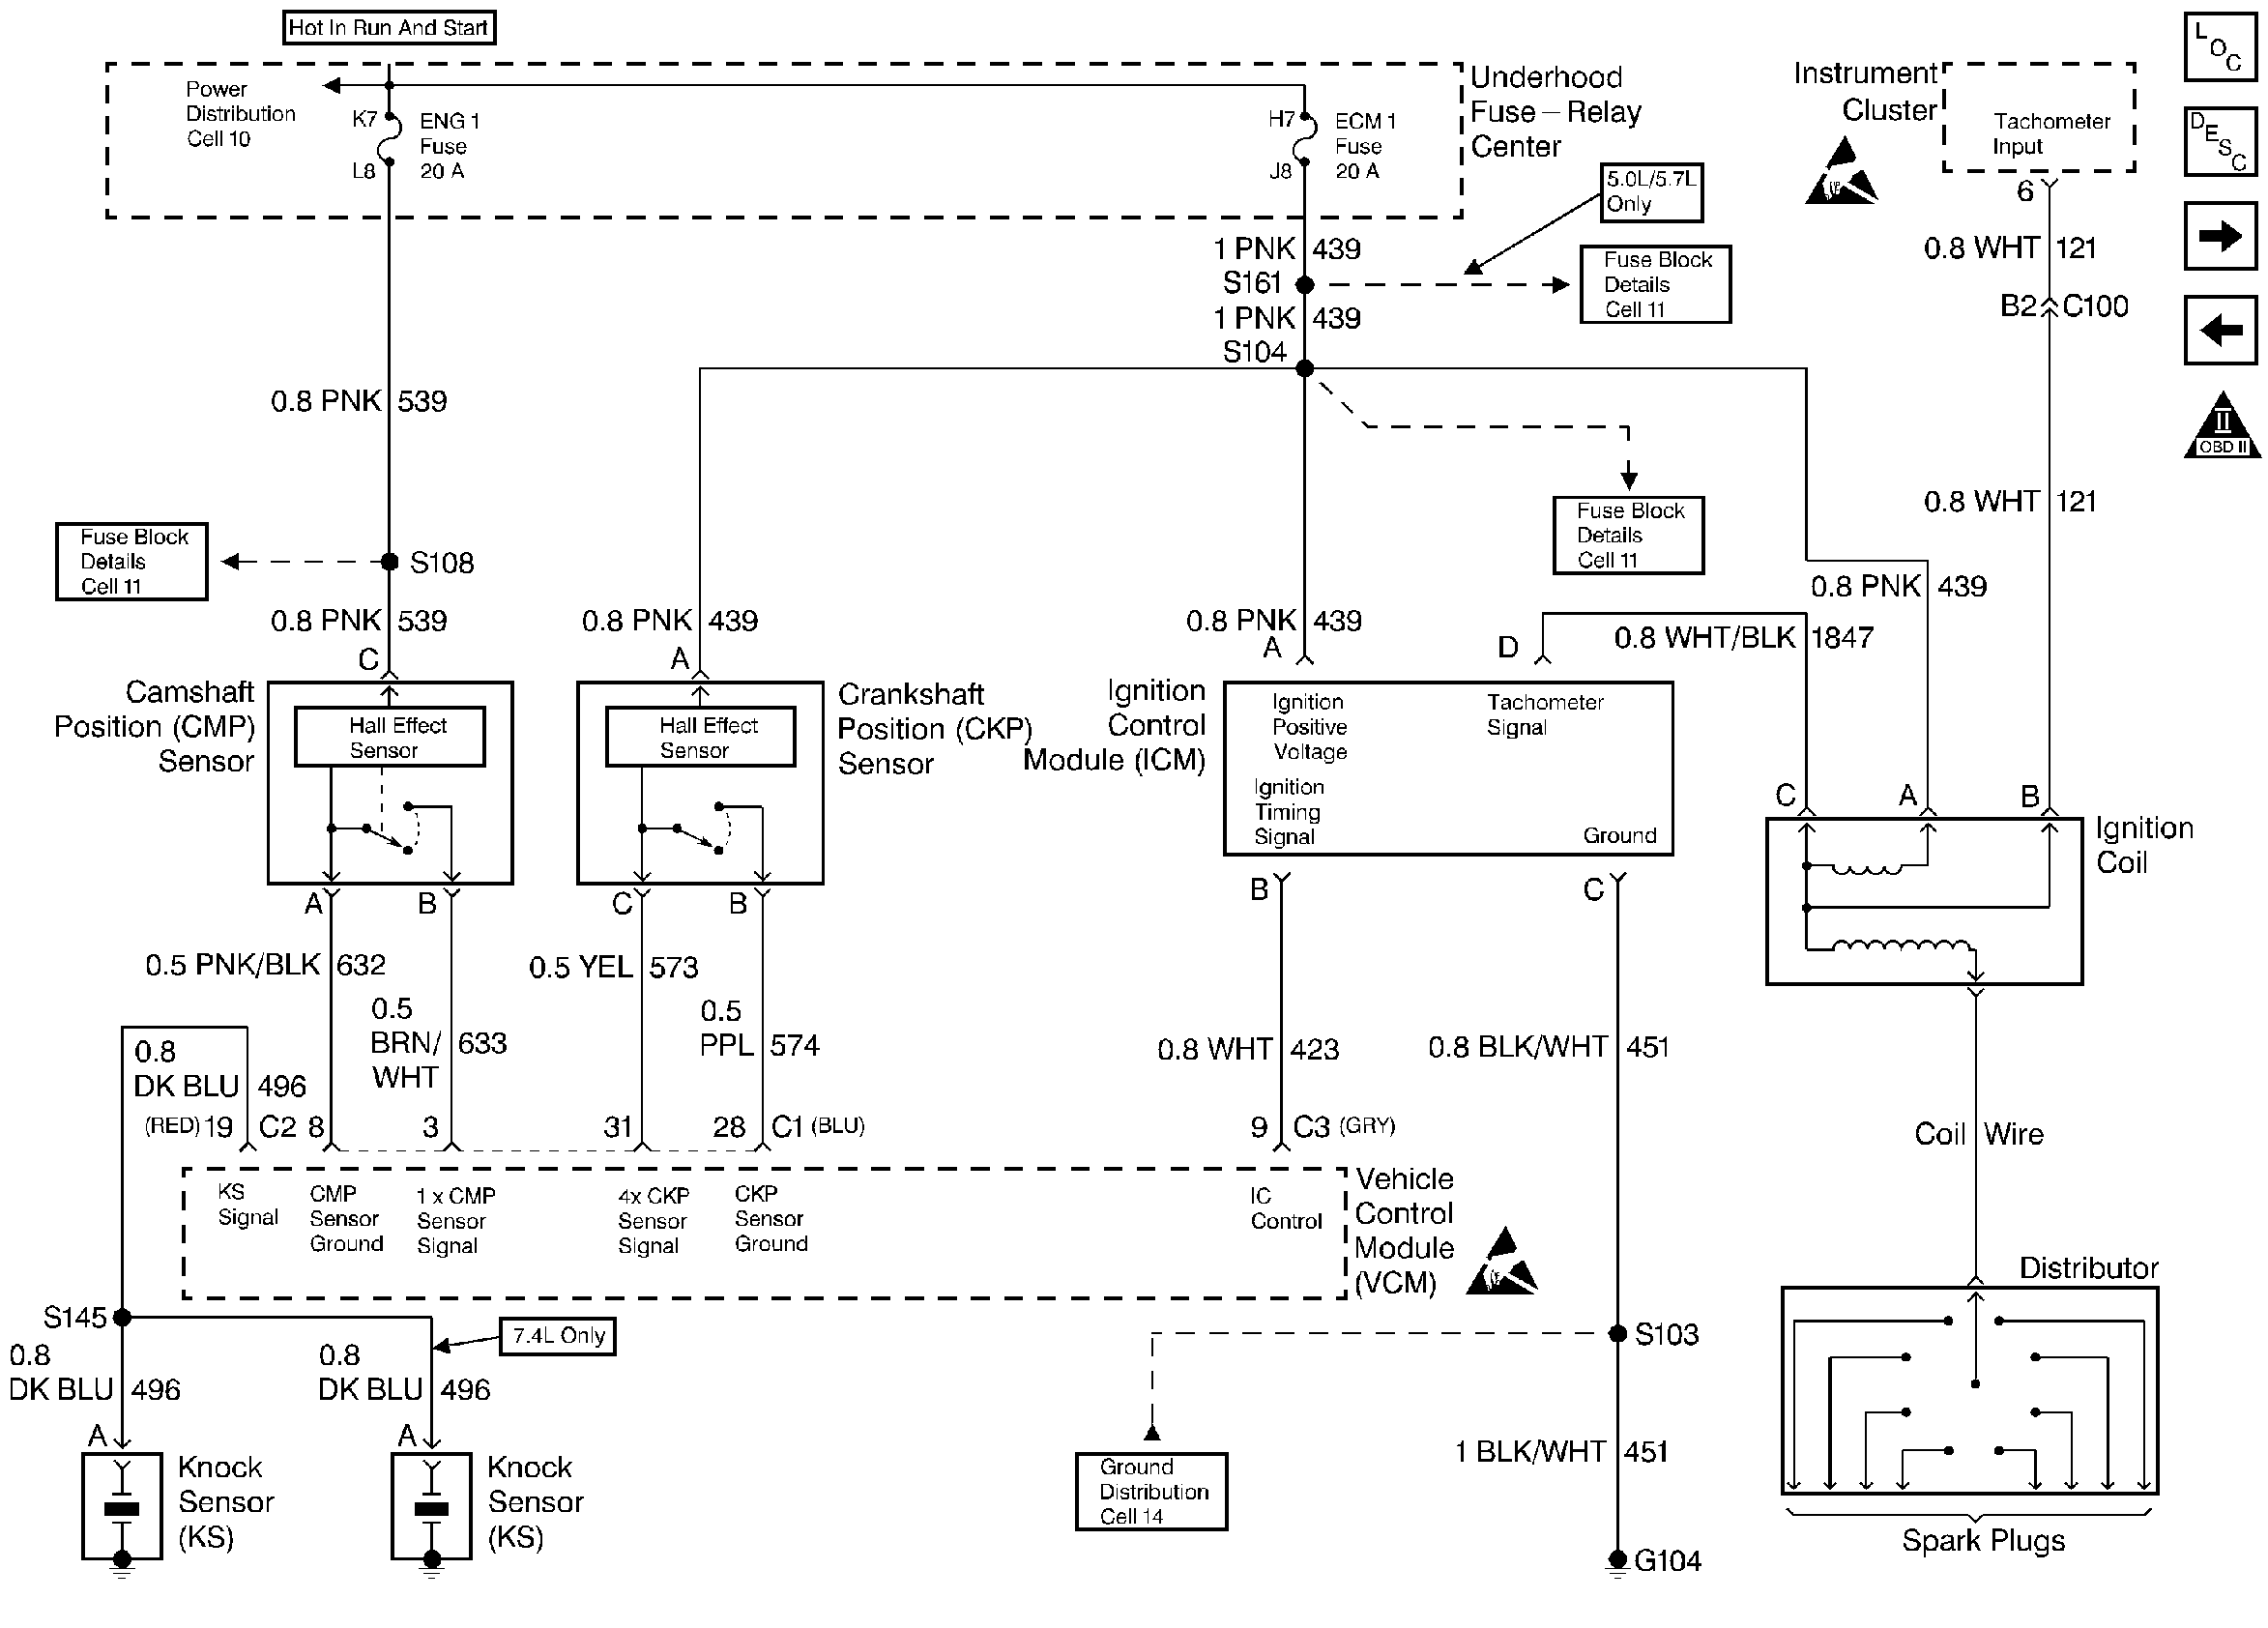 57 Chevy Dimmer Switch Wiring Diagram from wiringall.com